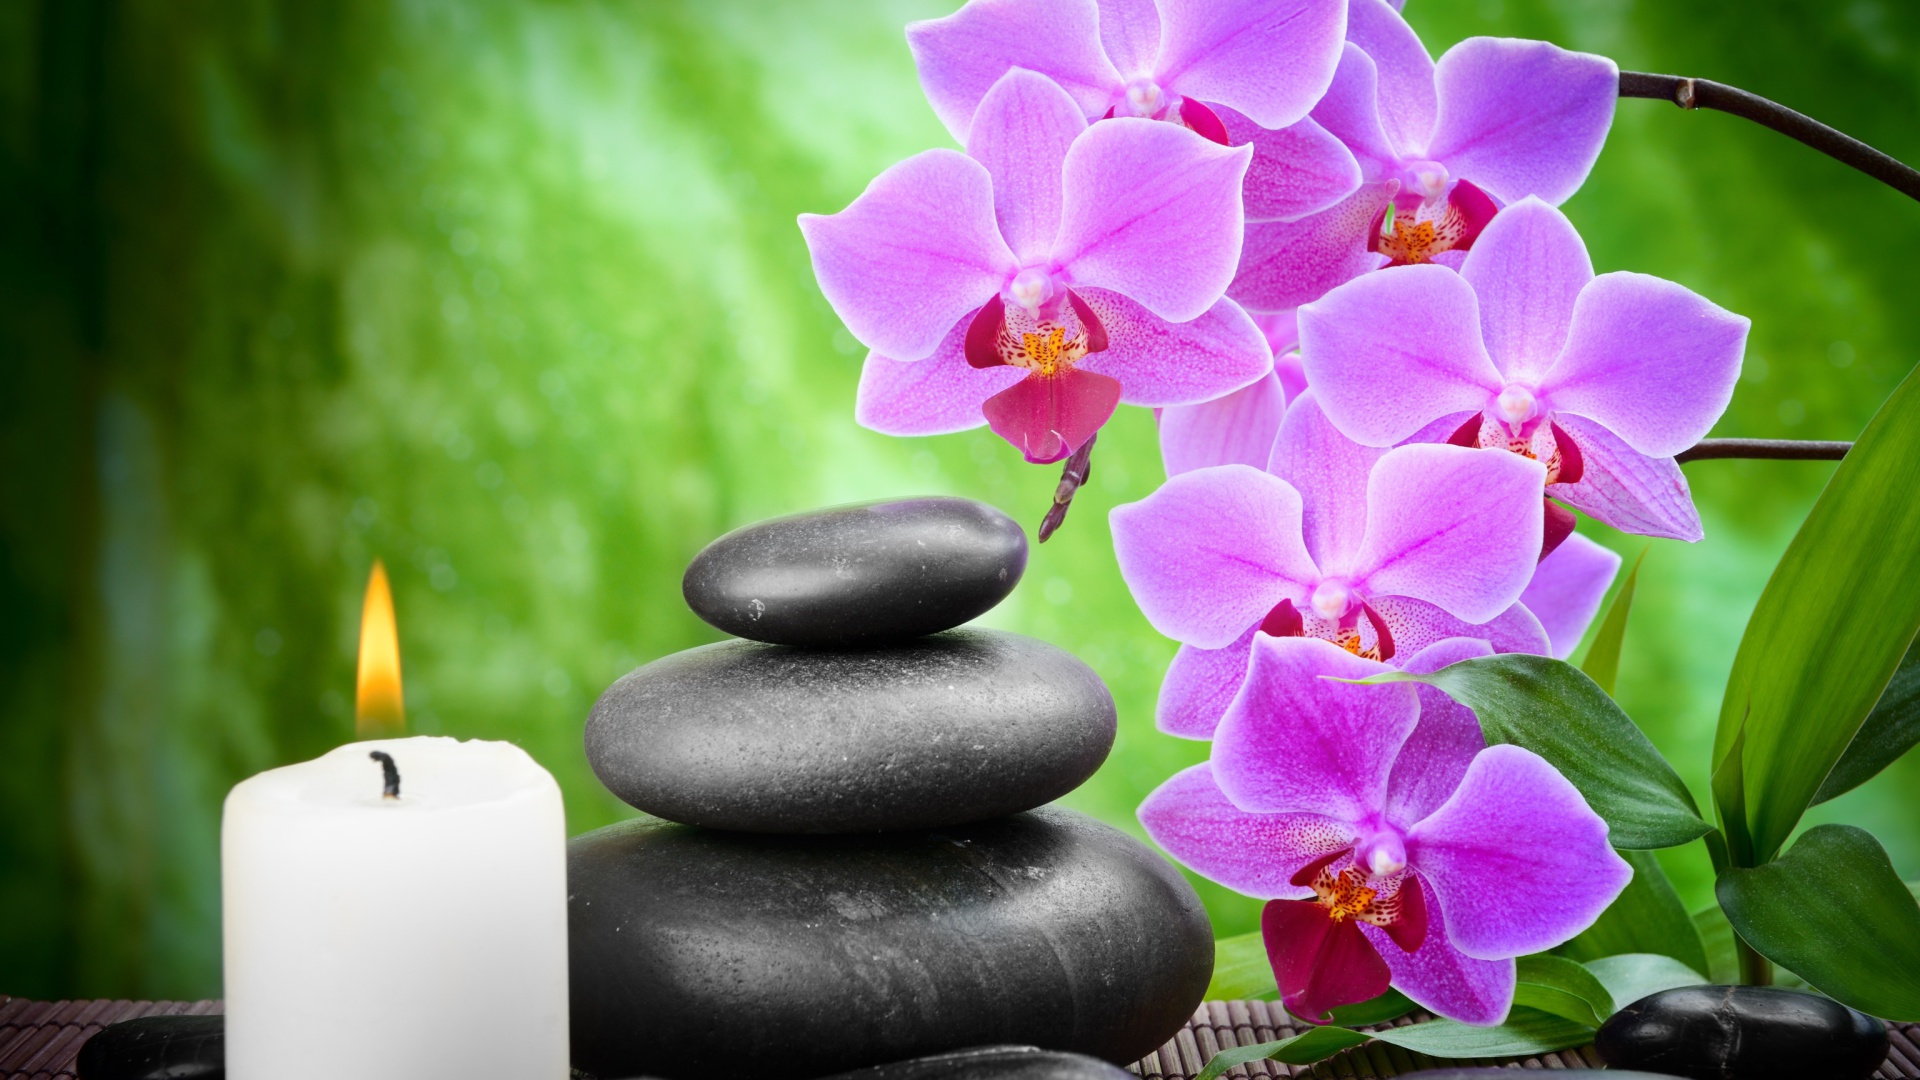 Pebbles, candles and orchids wallpaper 1920x1080